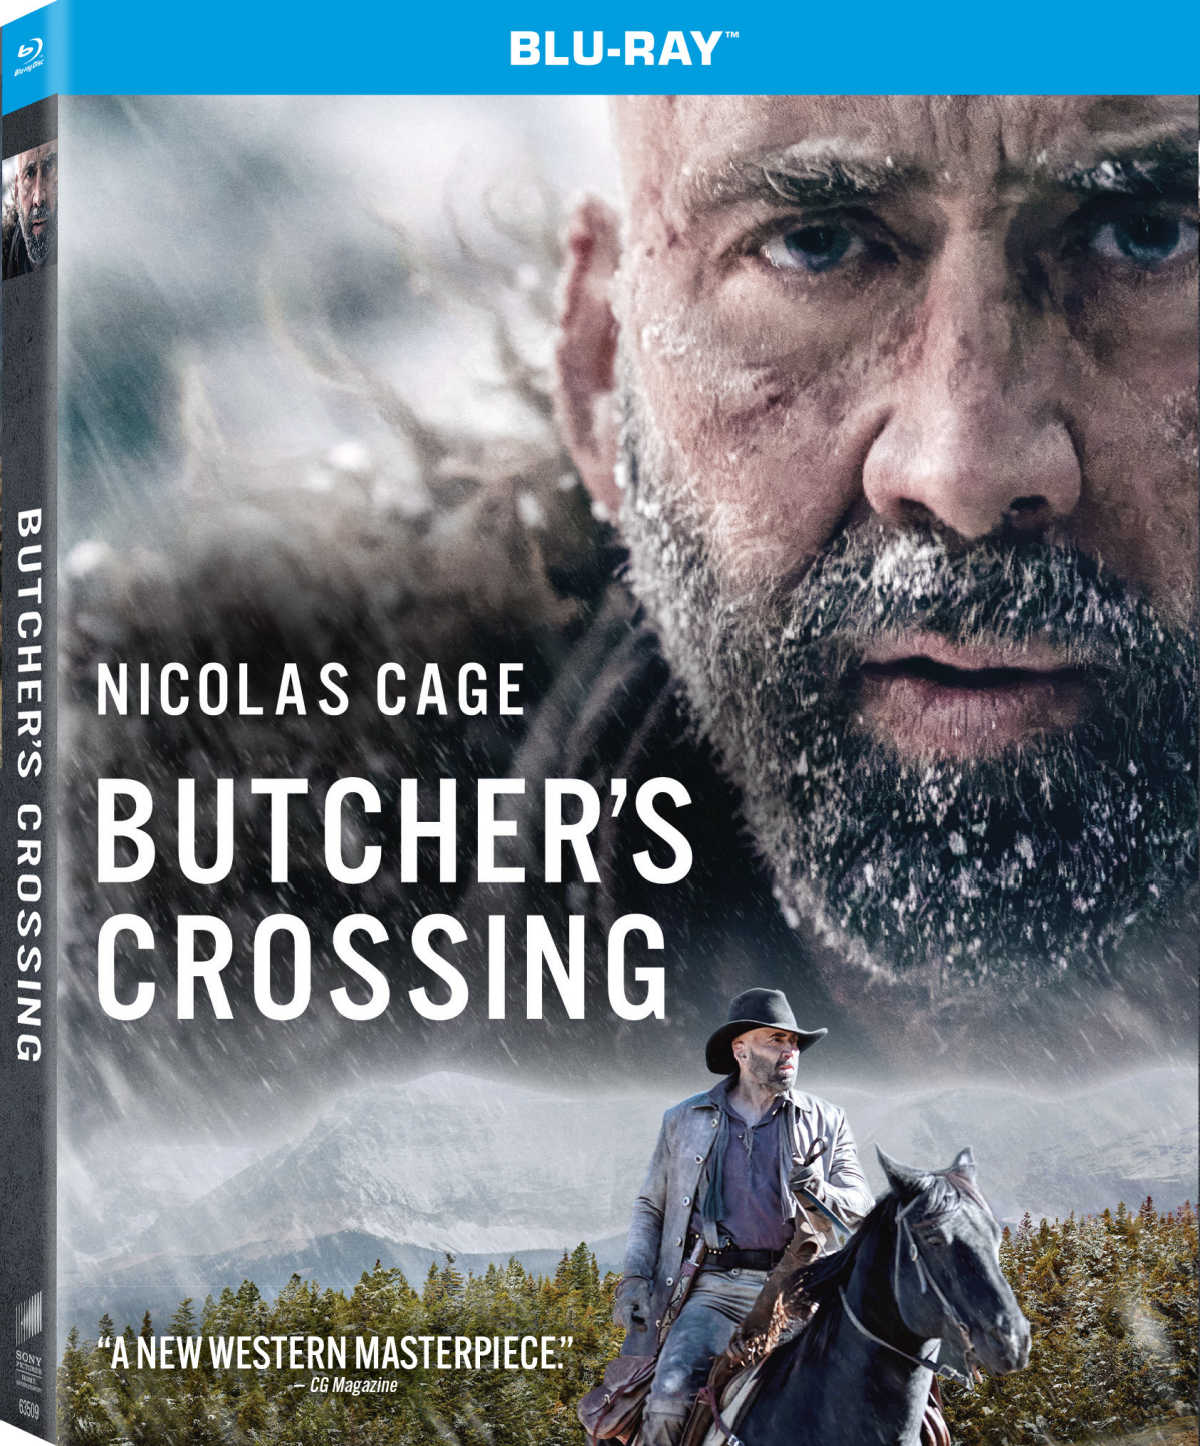 Saddle up for a Blu-ray adventure into the American frontier with "Butcher's Crossing." This neo-Western gem, starring Nicolas Cage, is a must-watch for fans of Westerns, psychological dramas, and Cage's unpredictable brilliance.